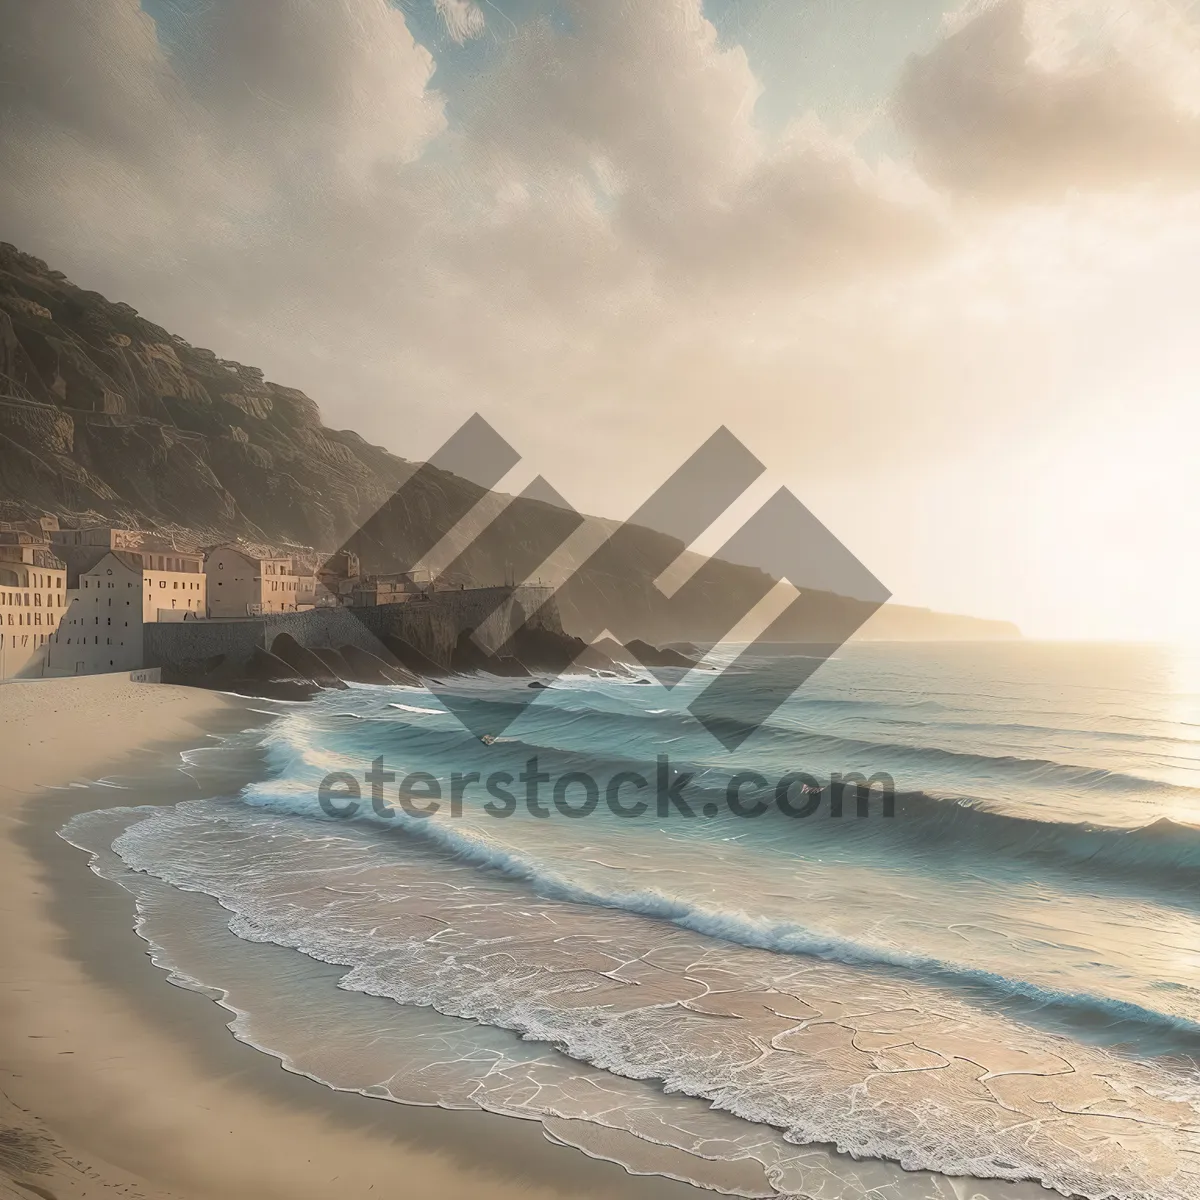 Picture of Tropical Paradise: Serene coastline with sandy beach and crystal blue waves